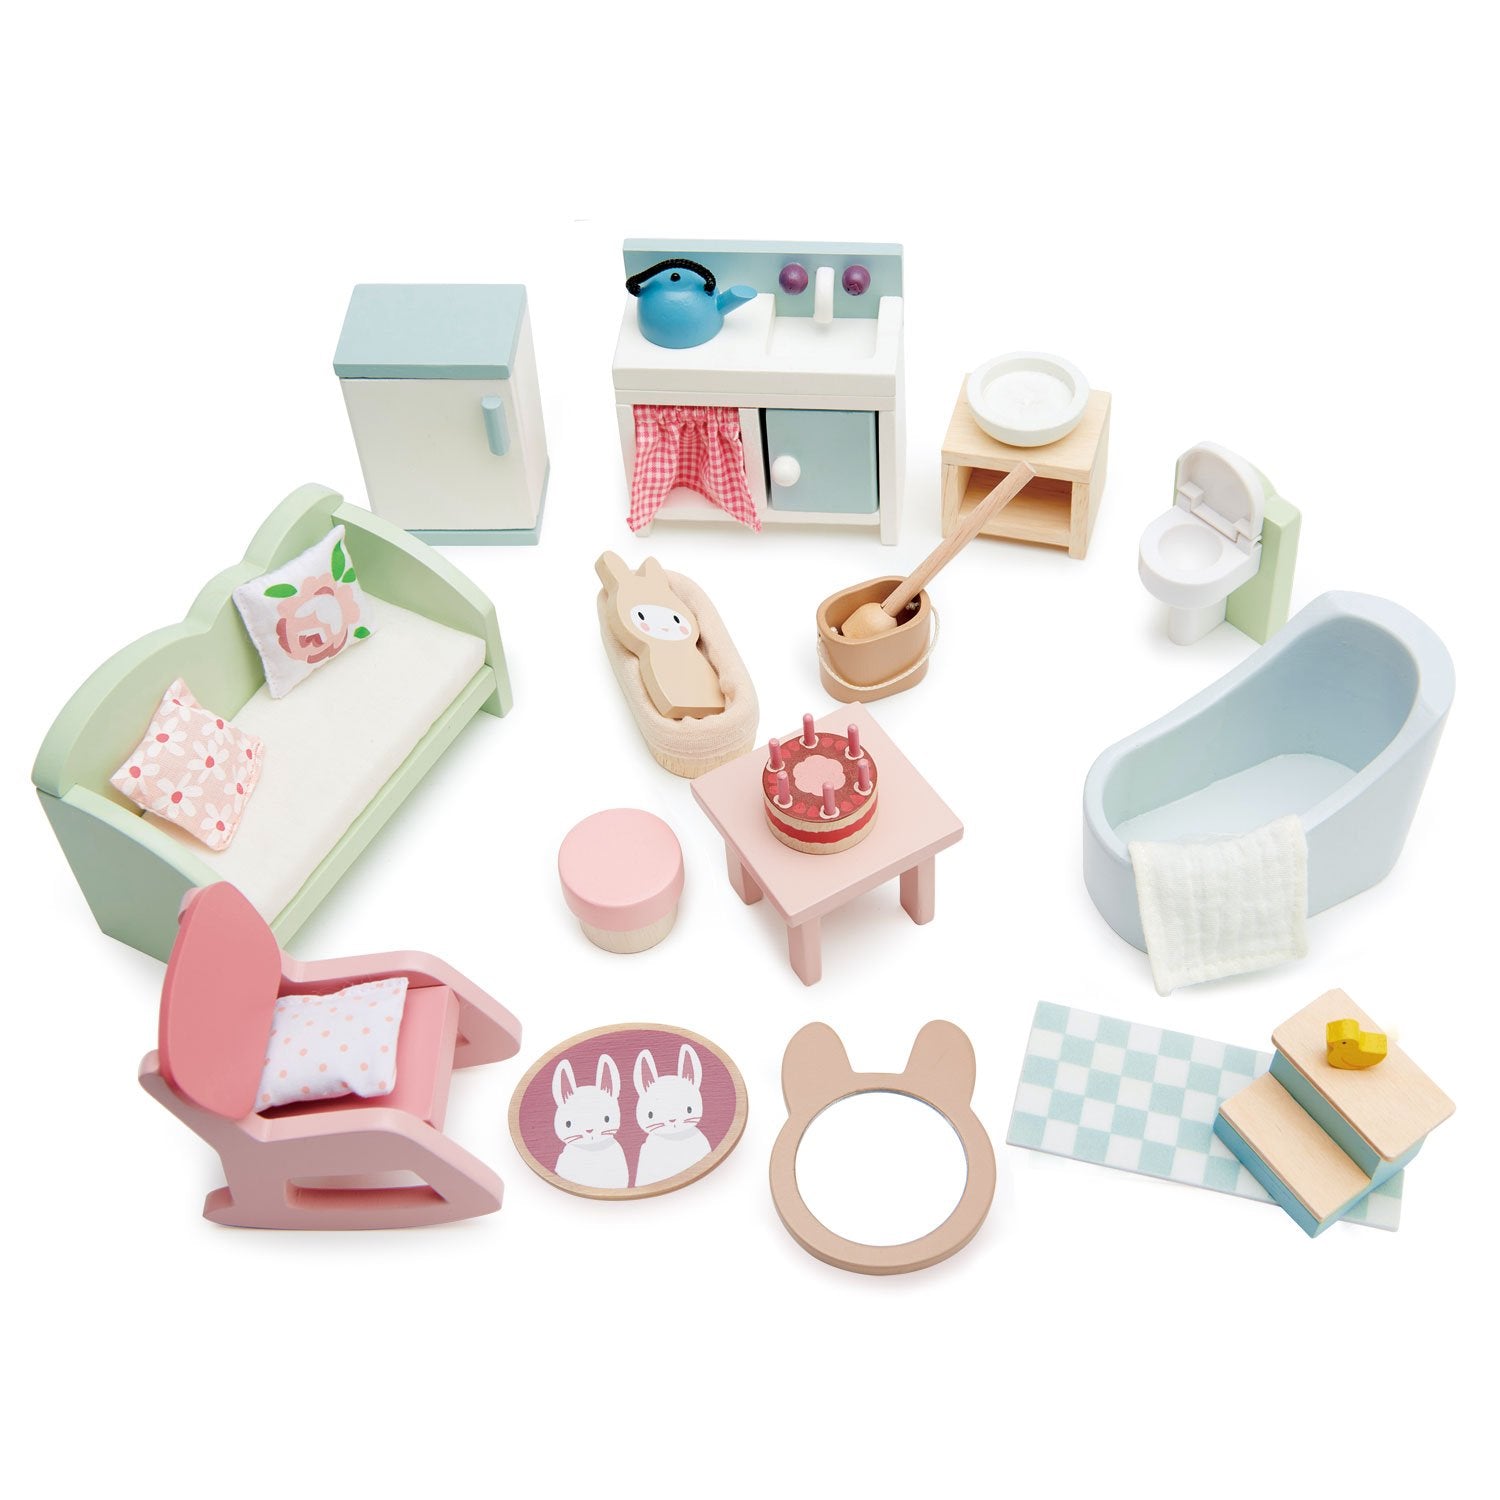 Dolls House Countryside Room Furniture by Tender Leaf Toys